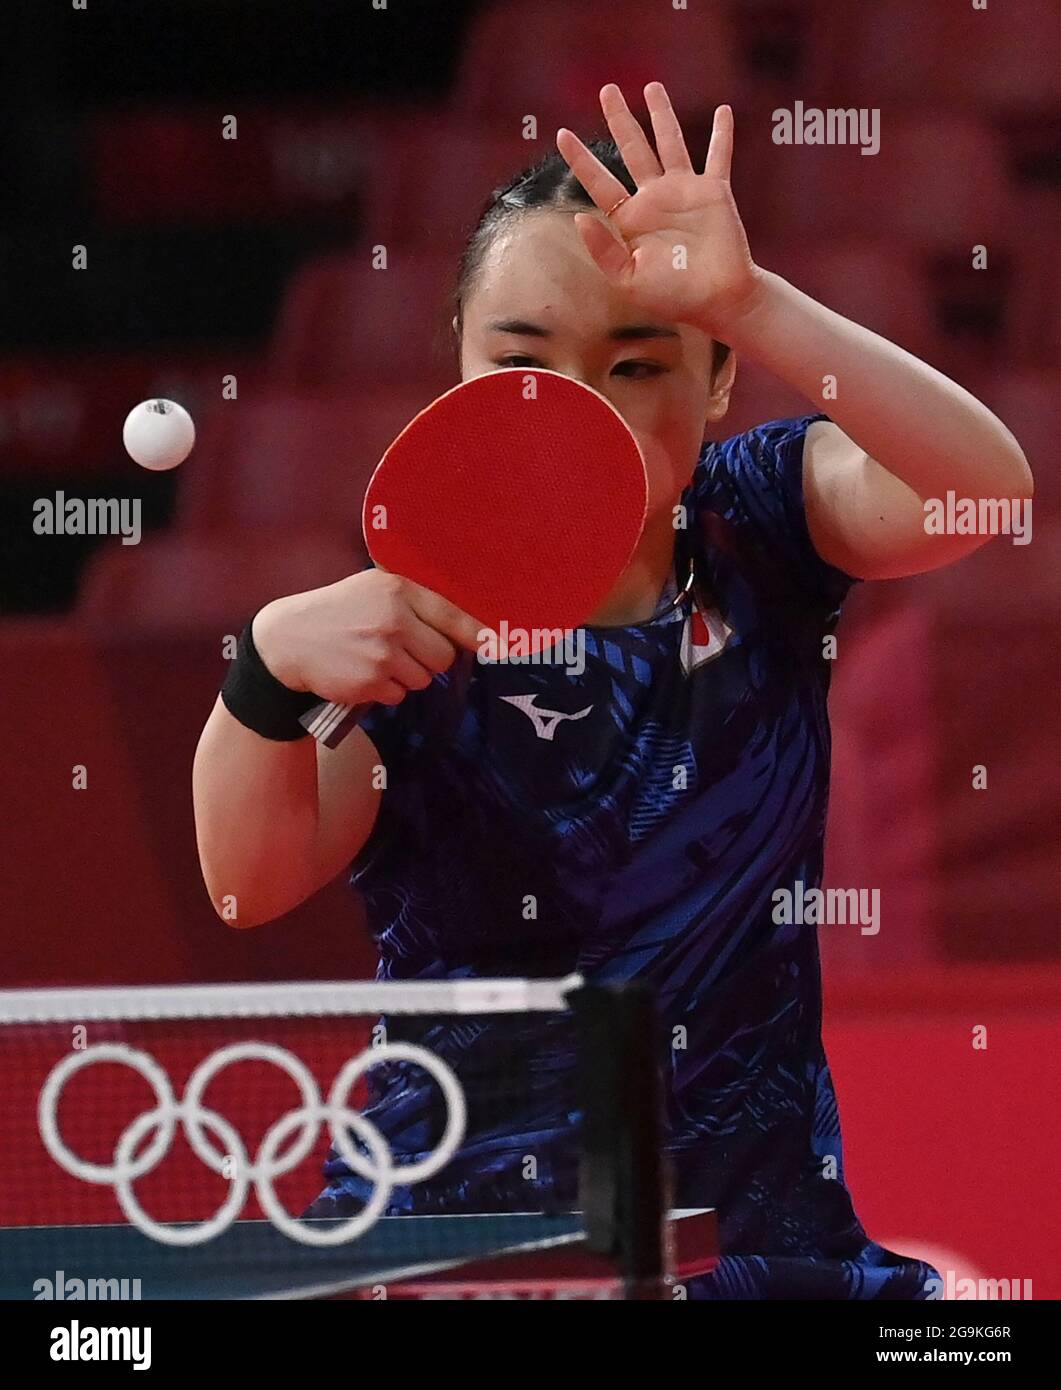 Tokyo, Japan. 27th July, 2021. Ito Mima of Japan returns the ball during the women's singles third round match against Fu Yu of Portugal at Tokyo 2020 Olympic Games in Tokyo, Japan, July 27, 2021. Credit: Guo Chen/Xinhua/Alamy Live News Stock Photo